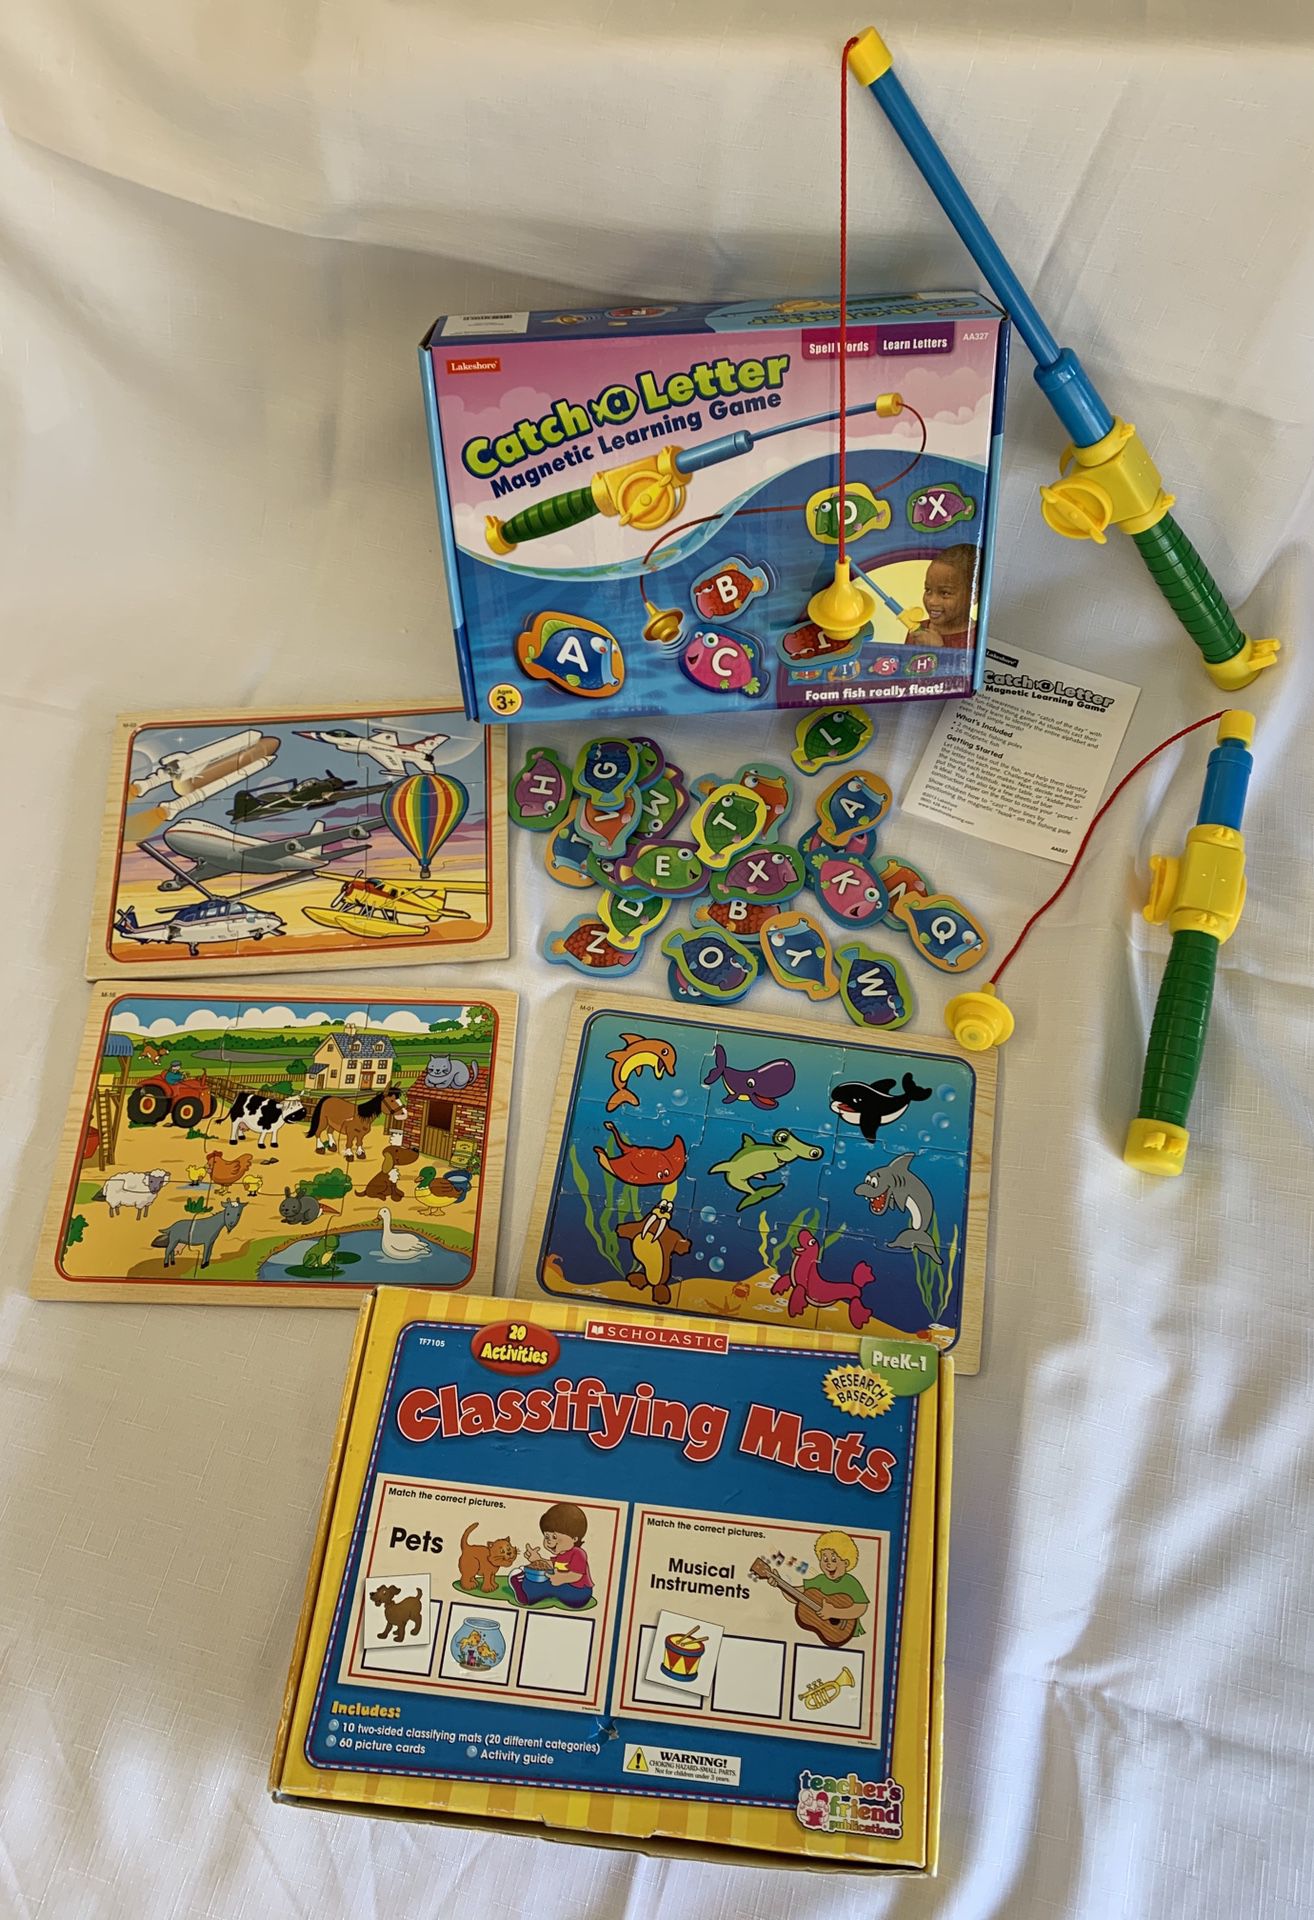 Pre-School learning games and puzzles Lakeshore / Scholastic